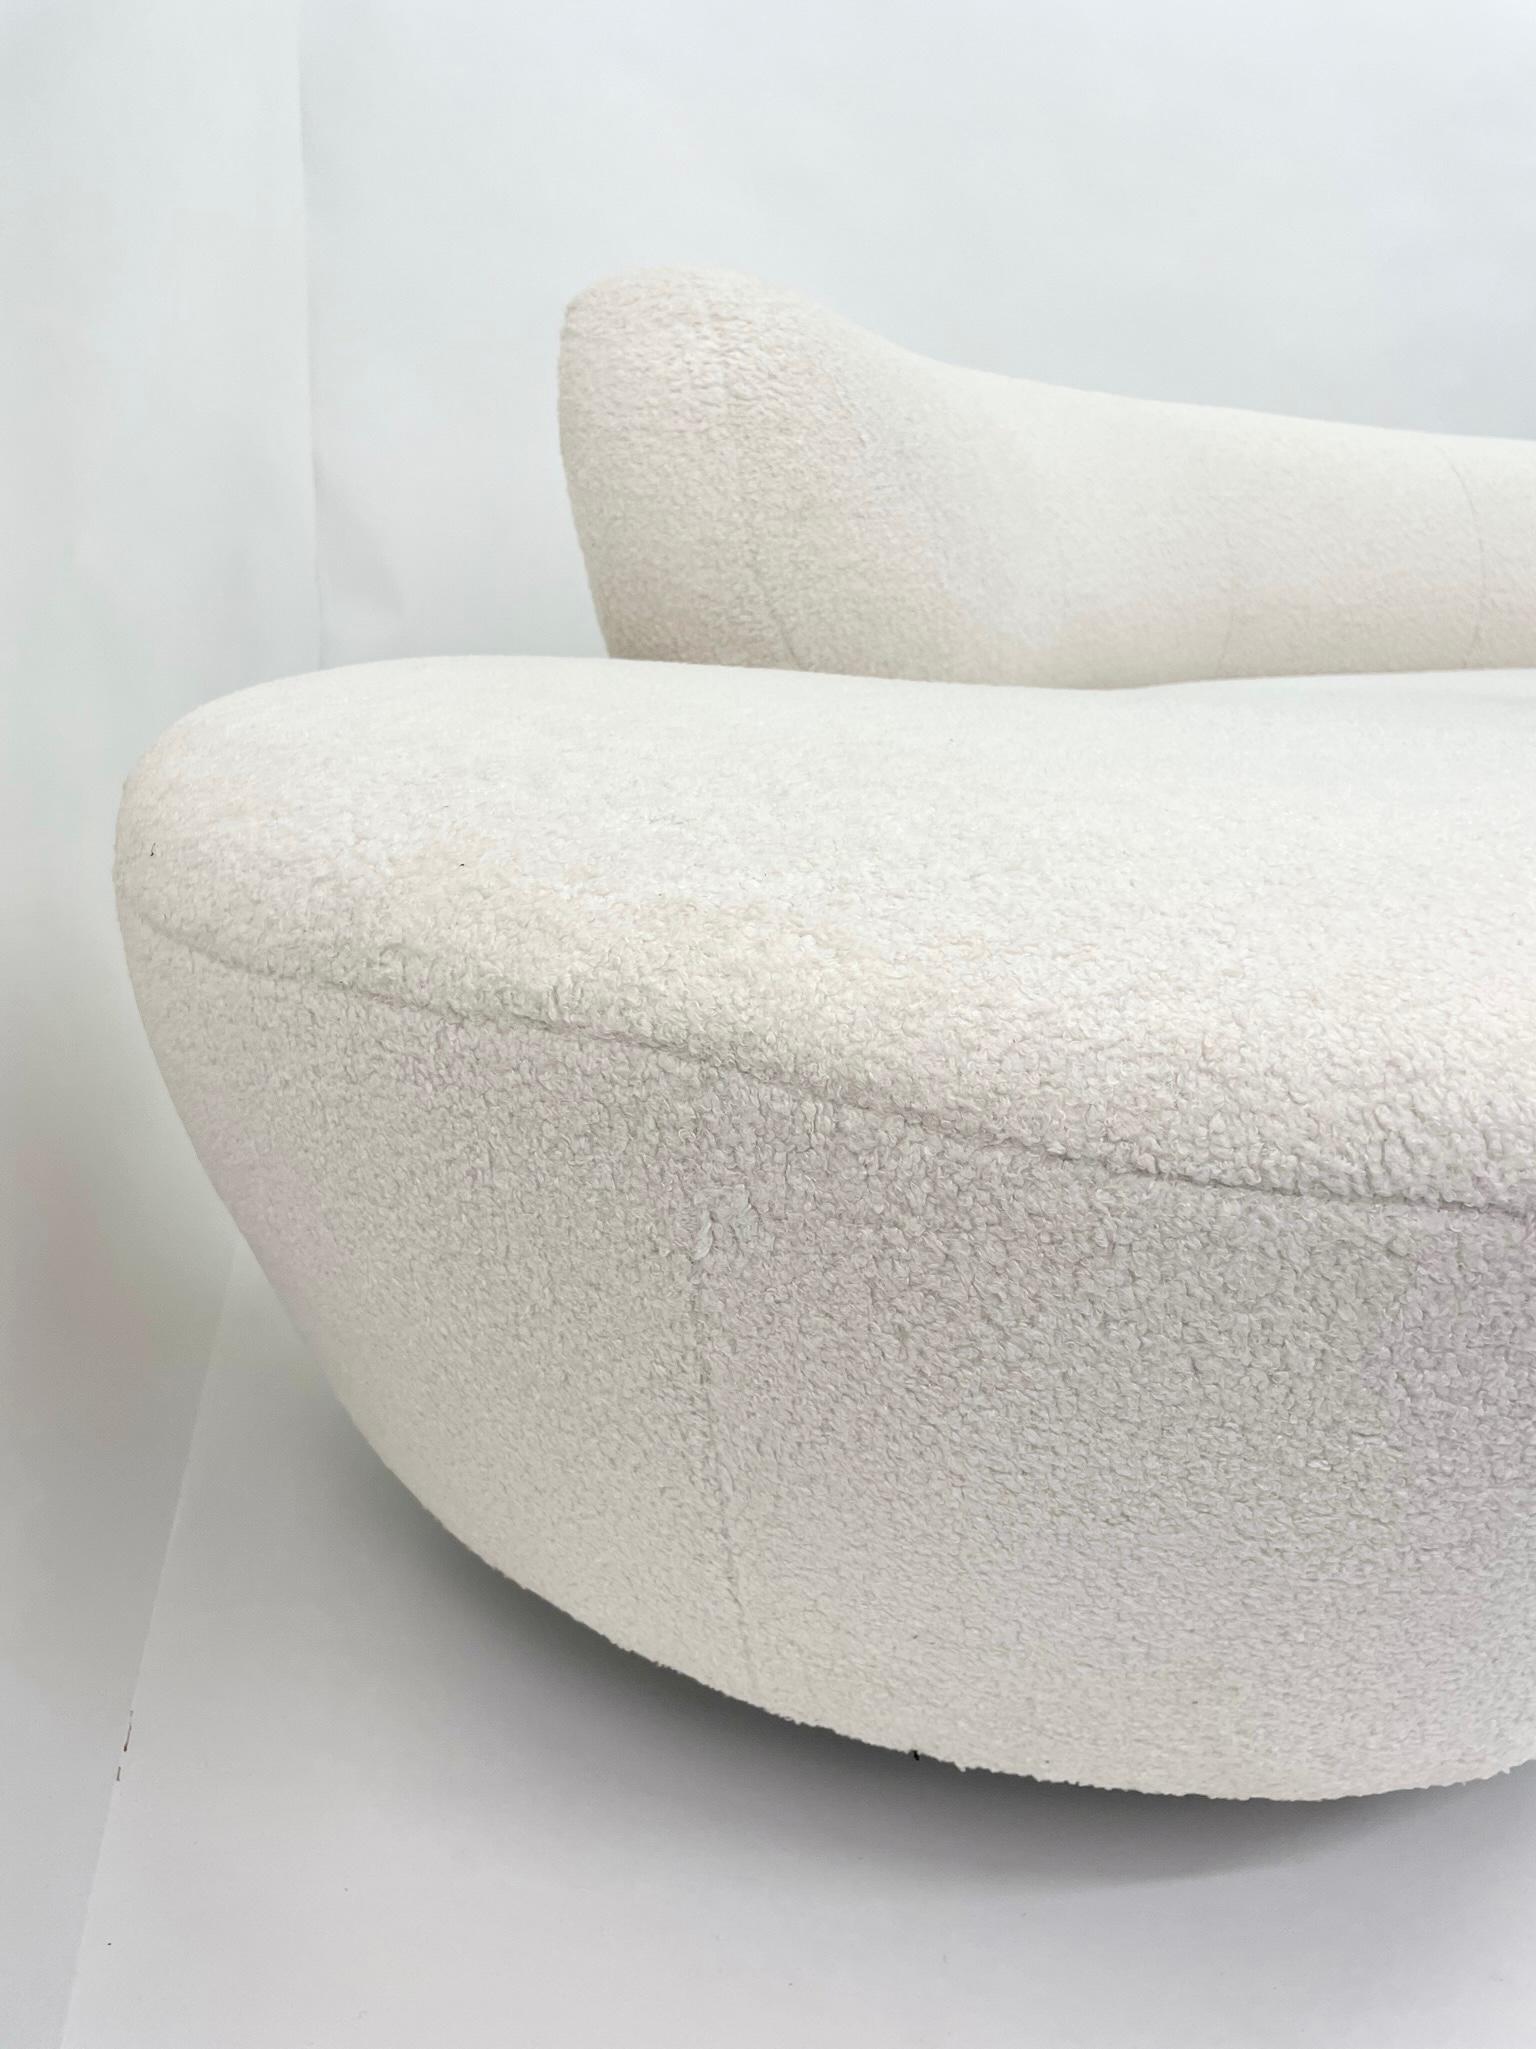 Late 20th Century Serpentine 'Cloud' Sofa by Vladimir Kagan for Directional